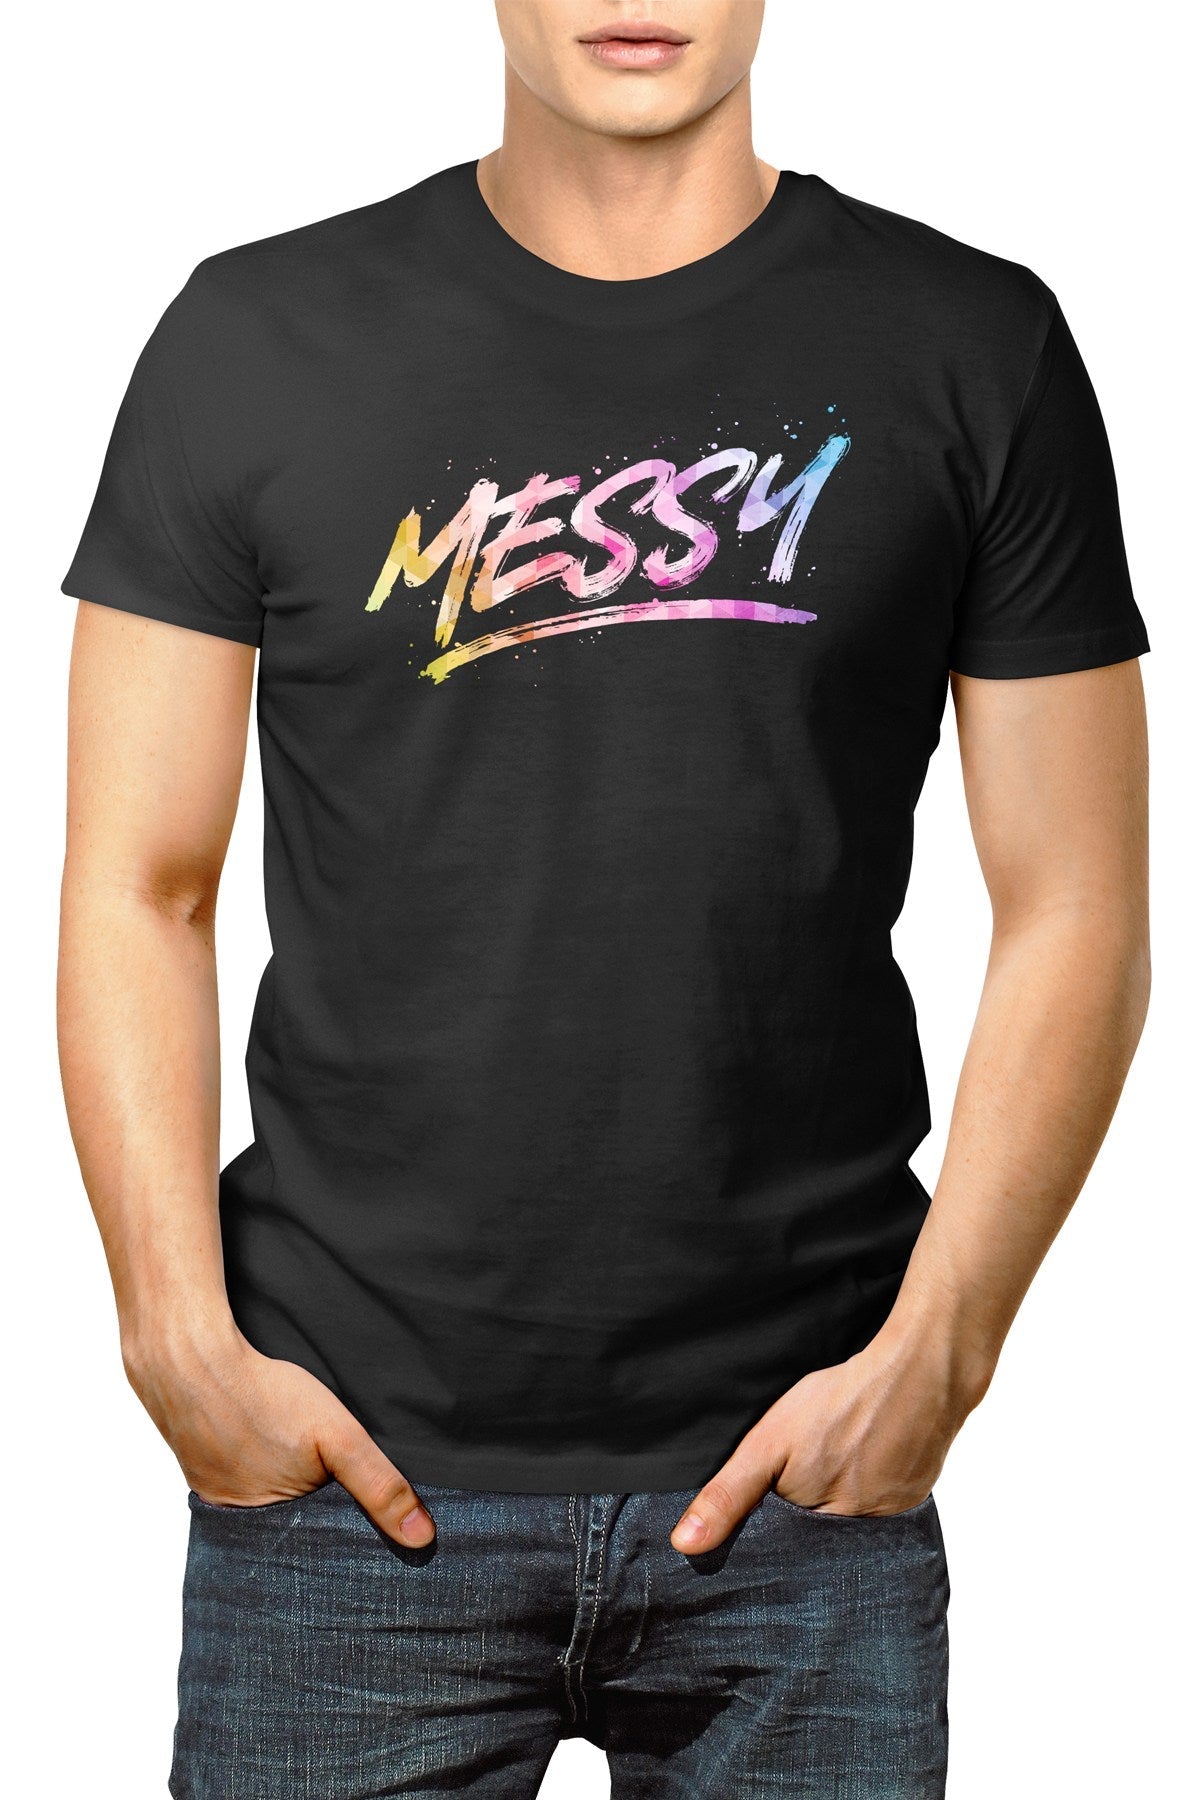 Messy Graphic Tee